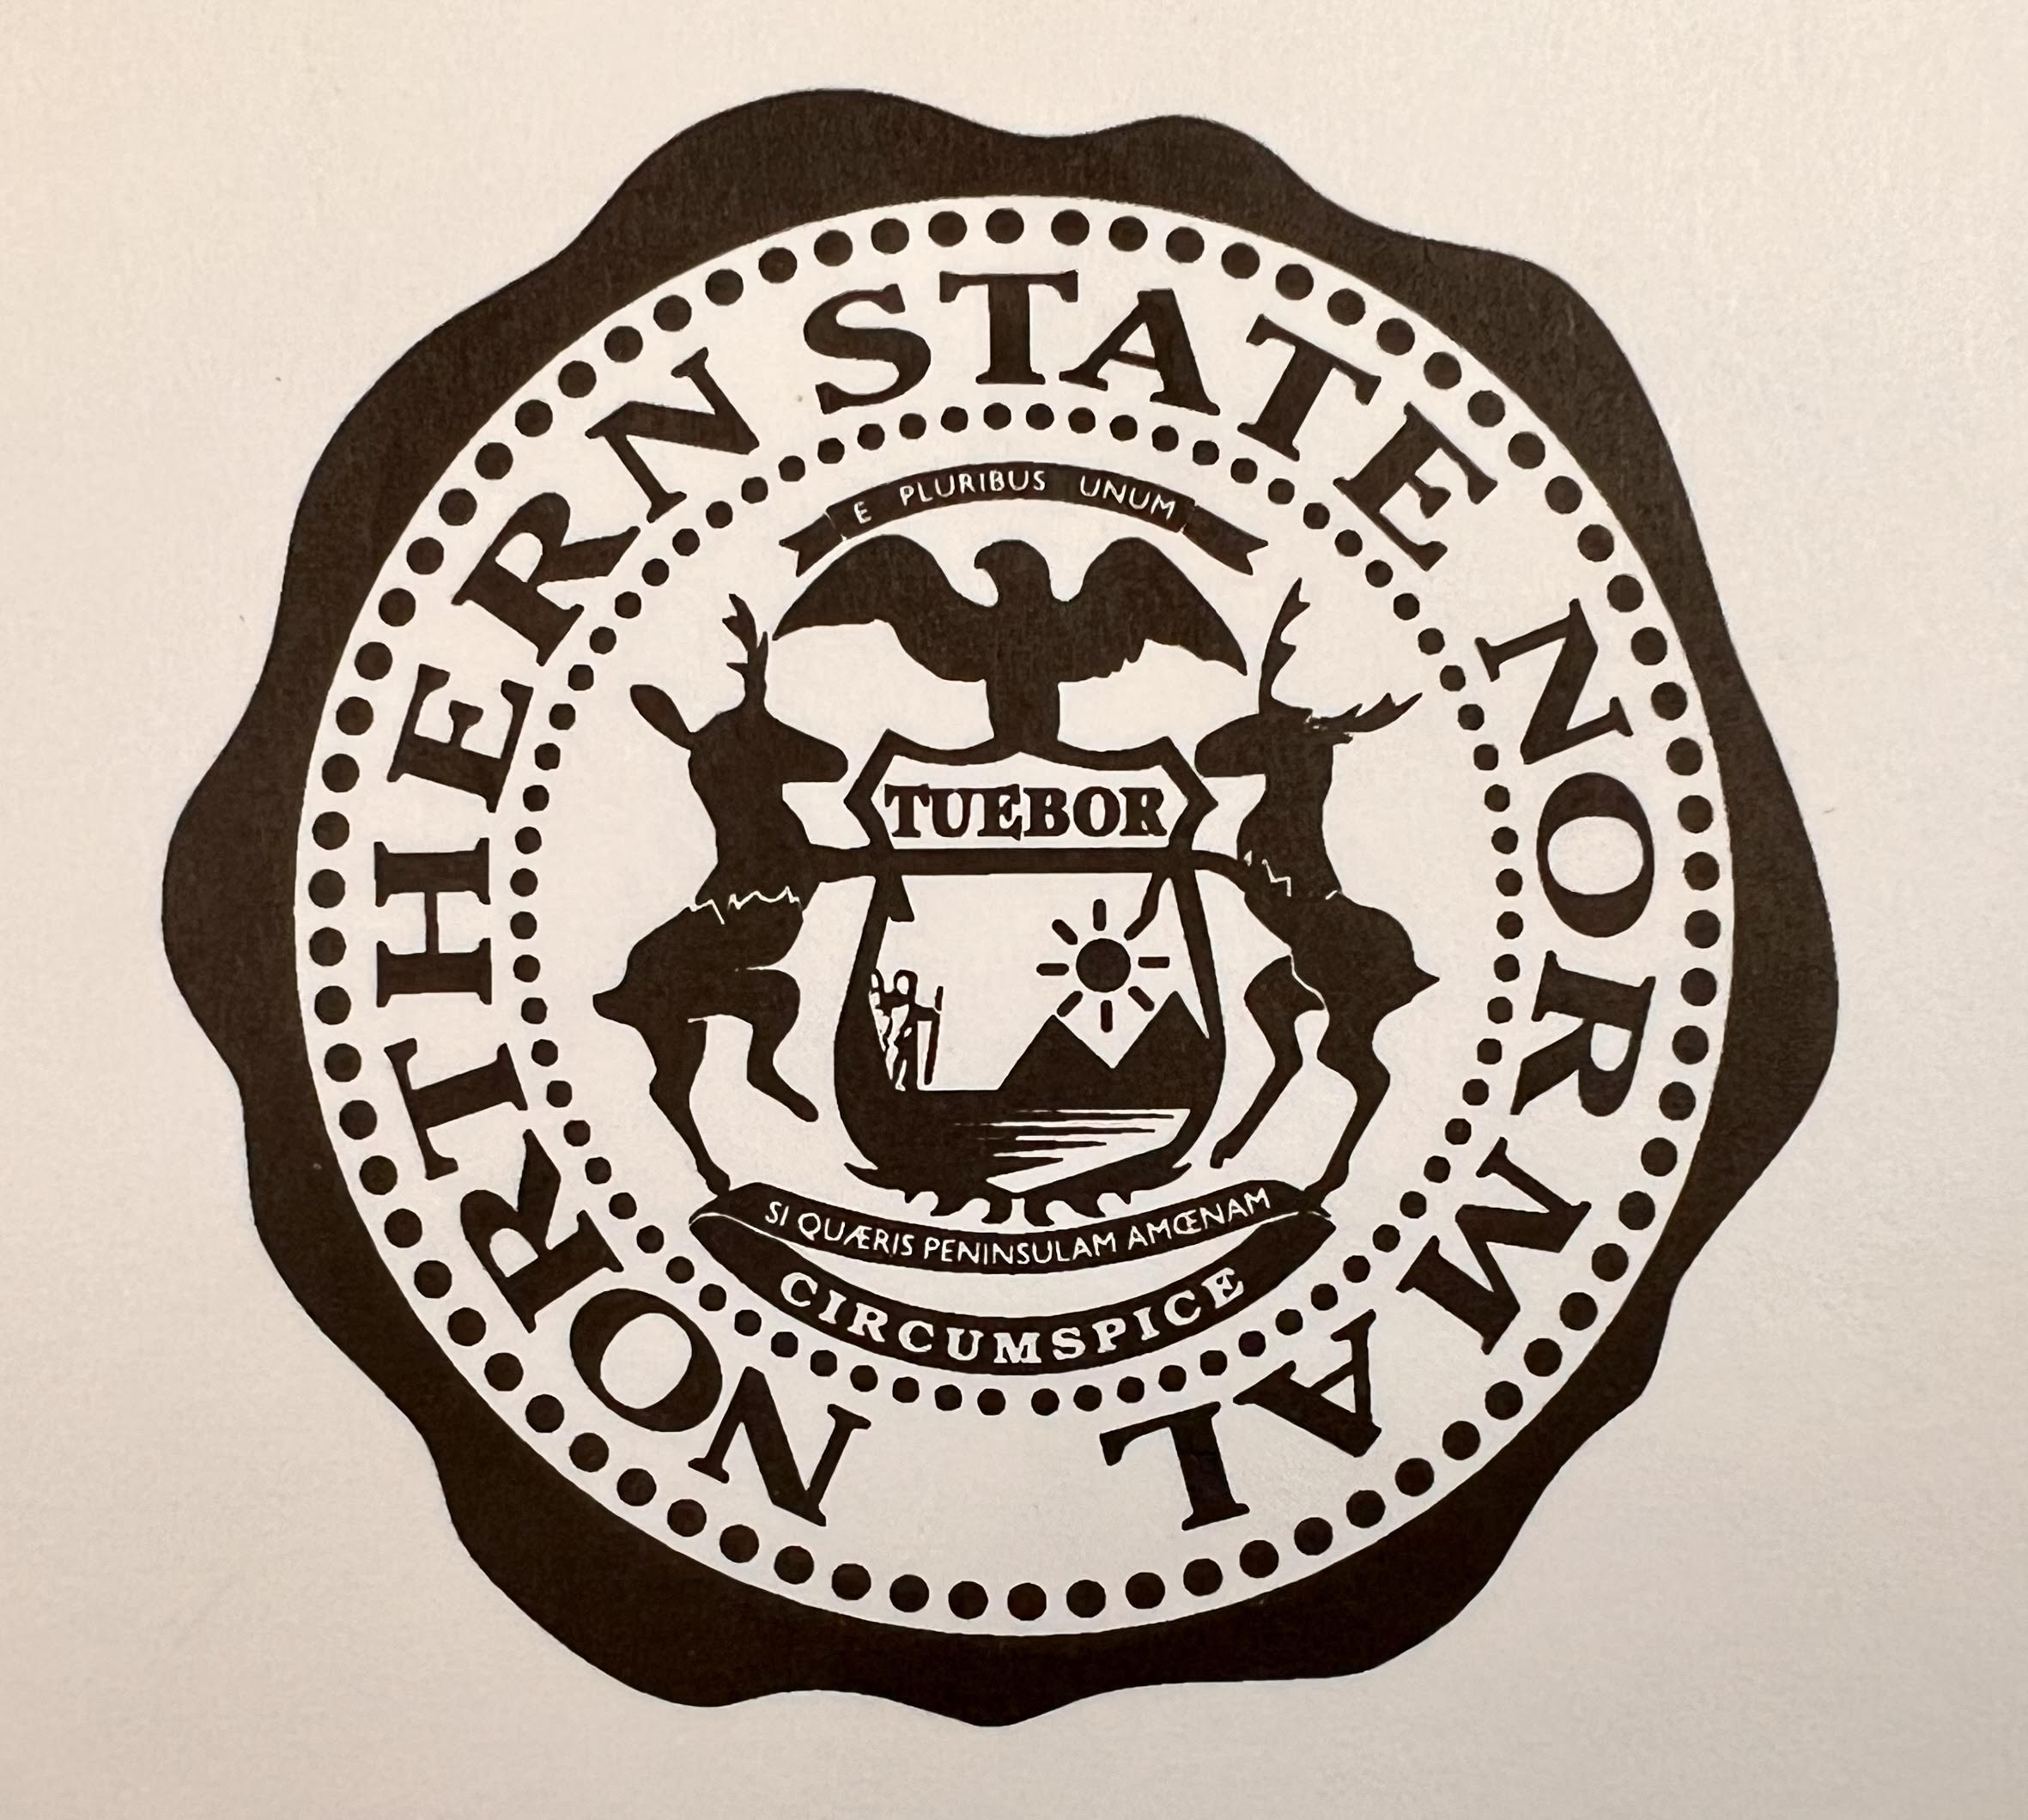 The seal for Northern State Normal School, which was the name from 1899-1927